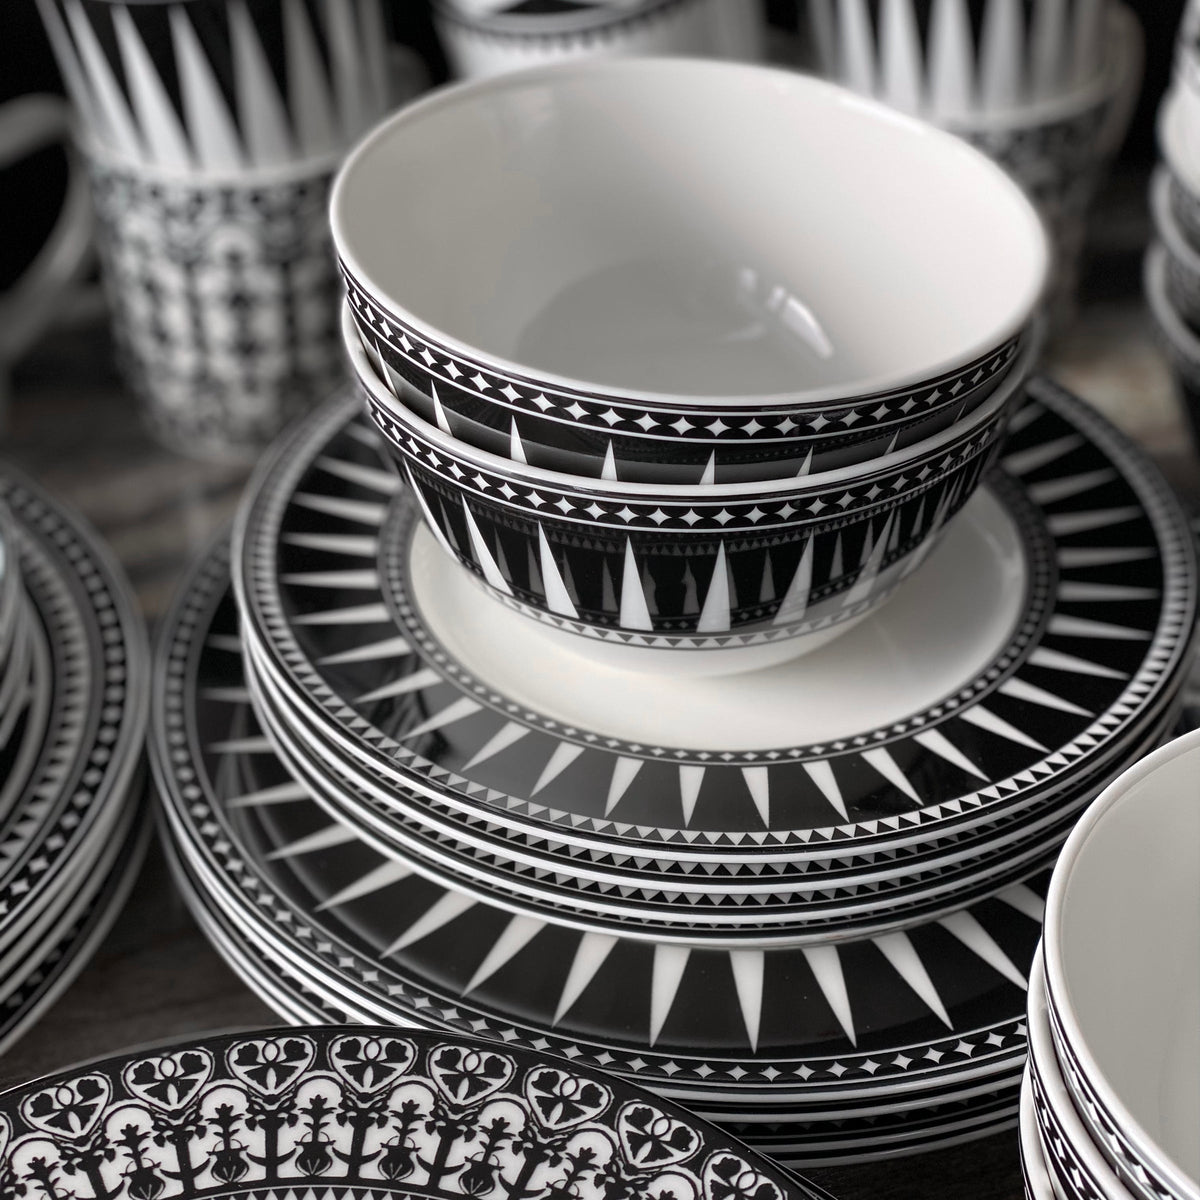 A set of Marrakech Black Rimmed Dinner Plates from the Geometrics Collection by Caskata Artisanal Home, inspired by the vibrant patterns of Marrakech, displayed on a table.